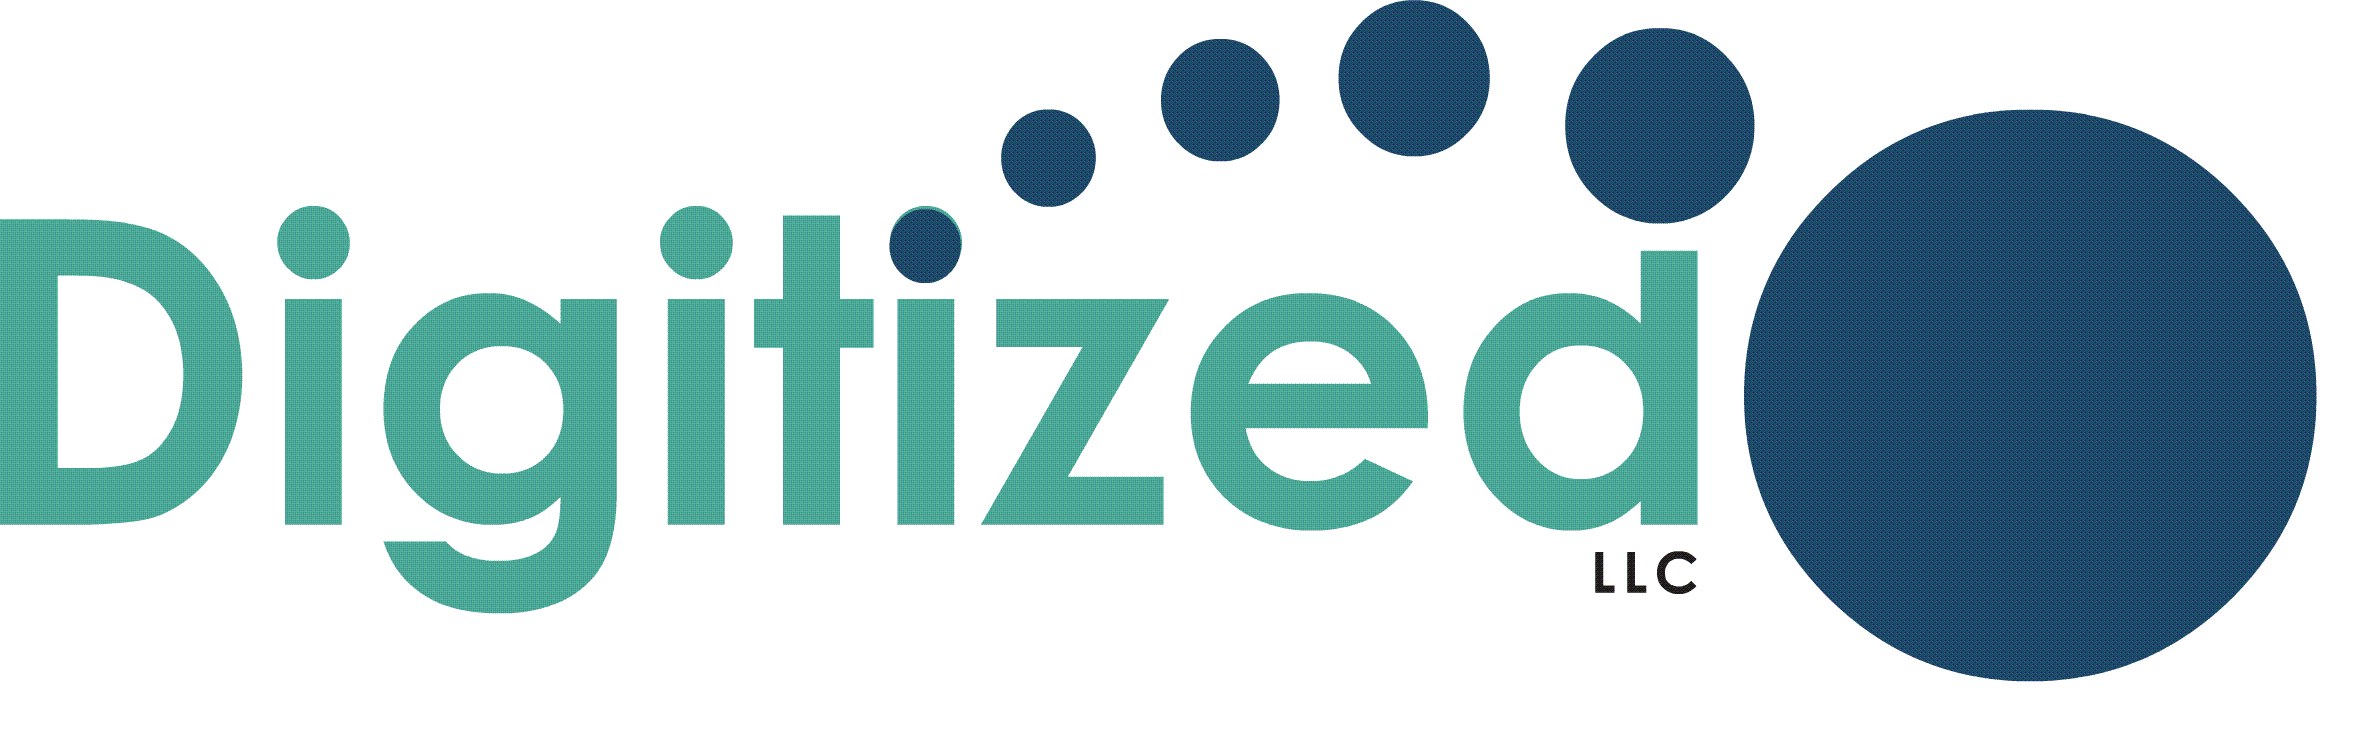 Analyze, Refresh, Connect with Digitized LLC - your Learning and Performance Implementation Partner.	